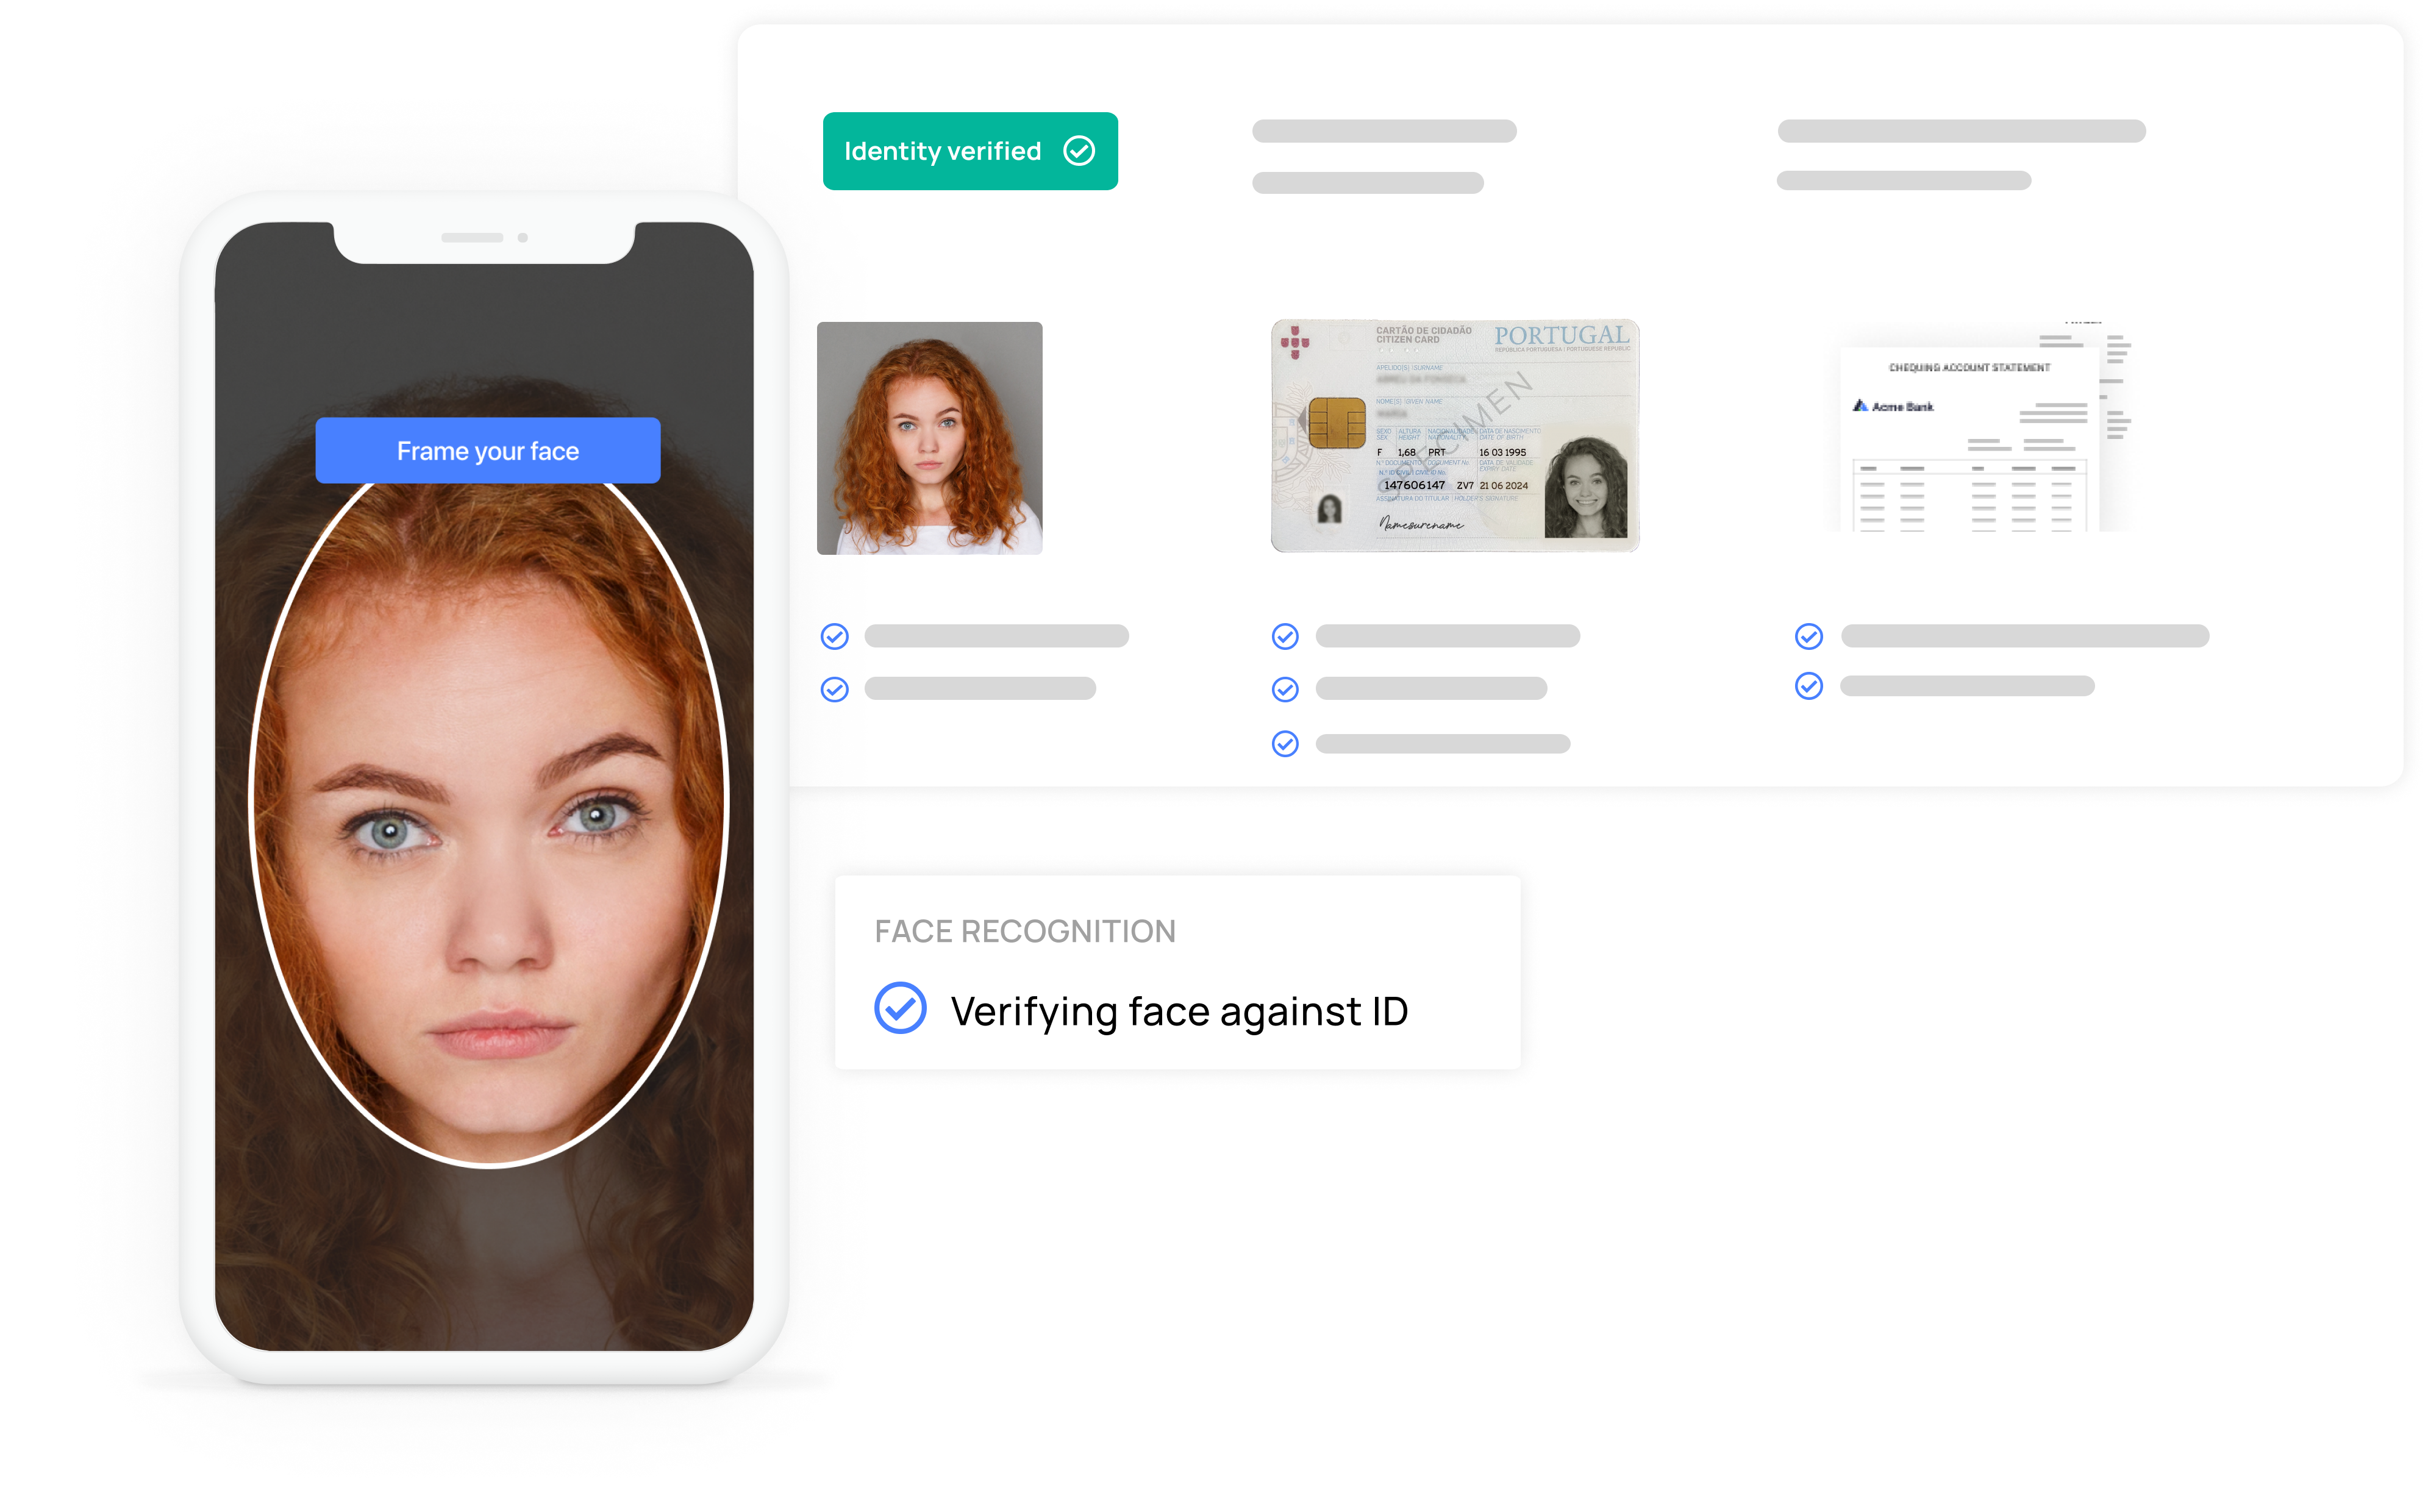 Identity verification with face matching, document verification and digital signature